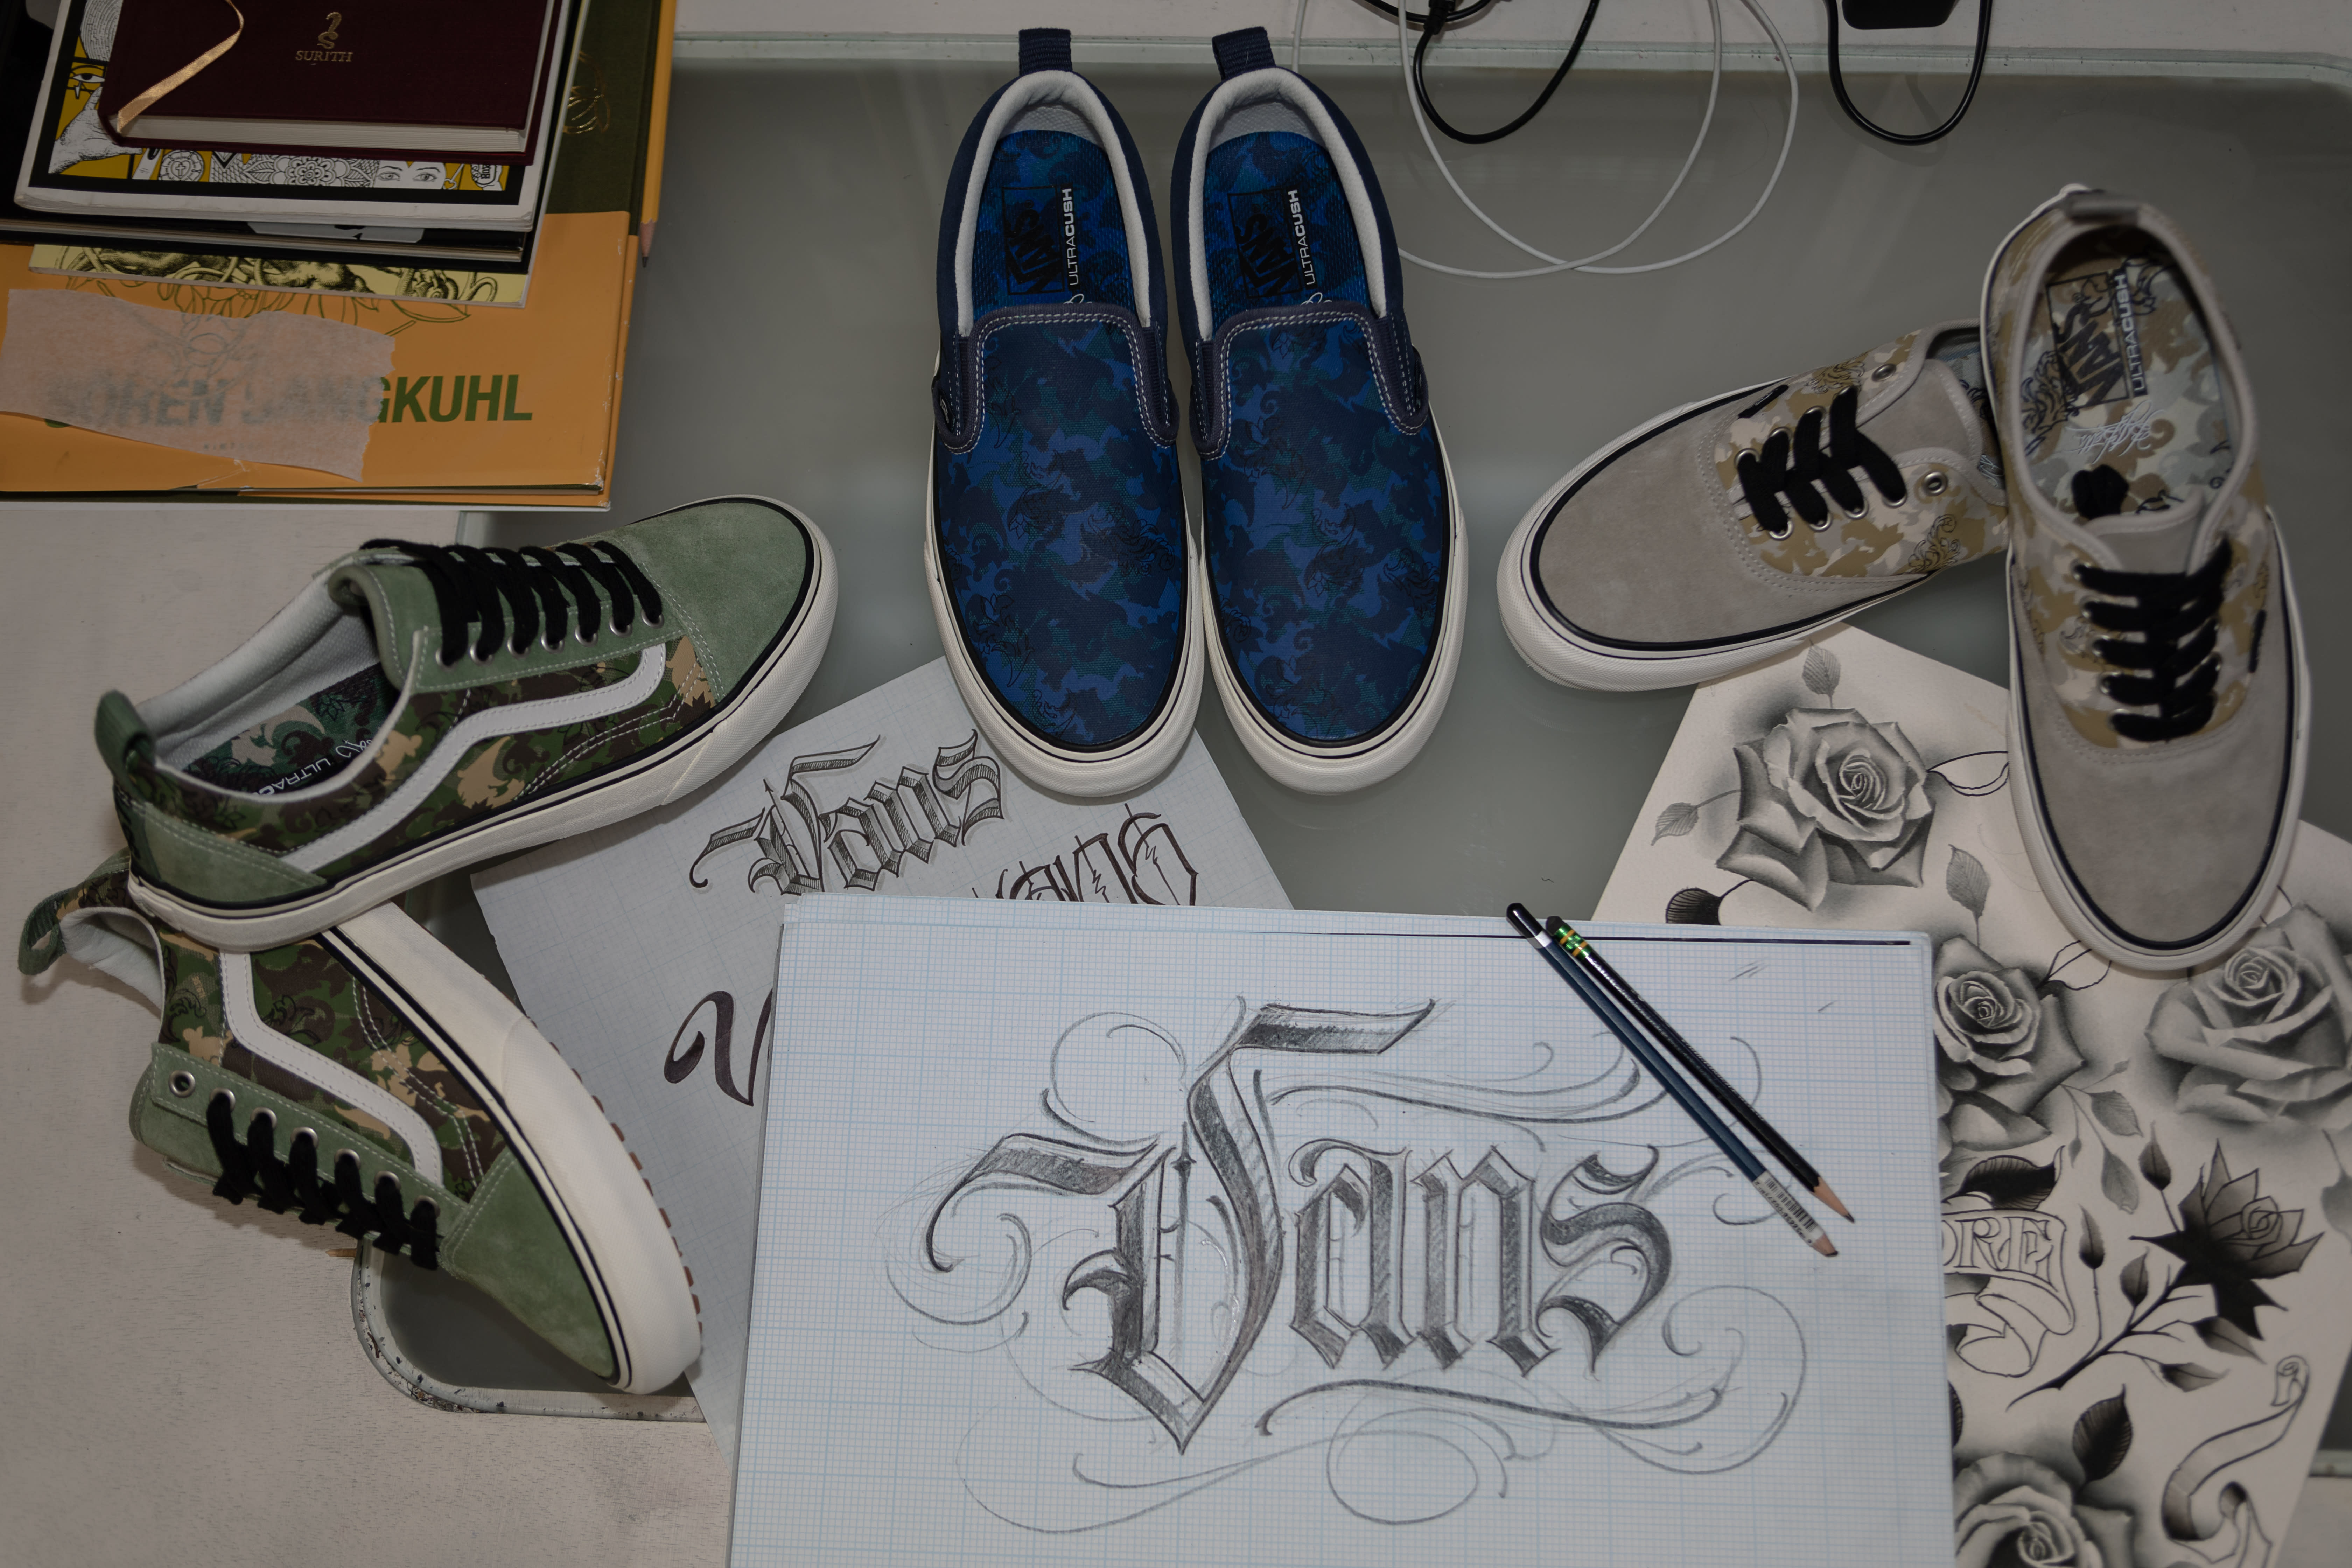 vans shoes are made in